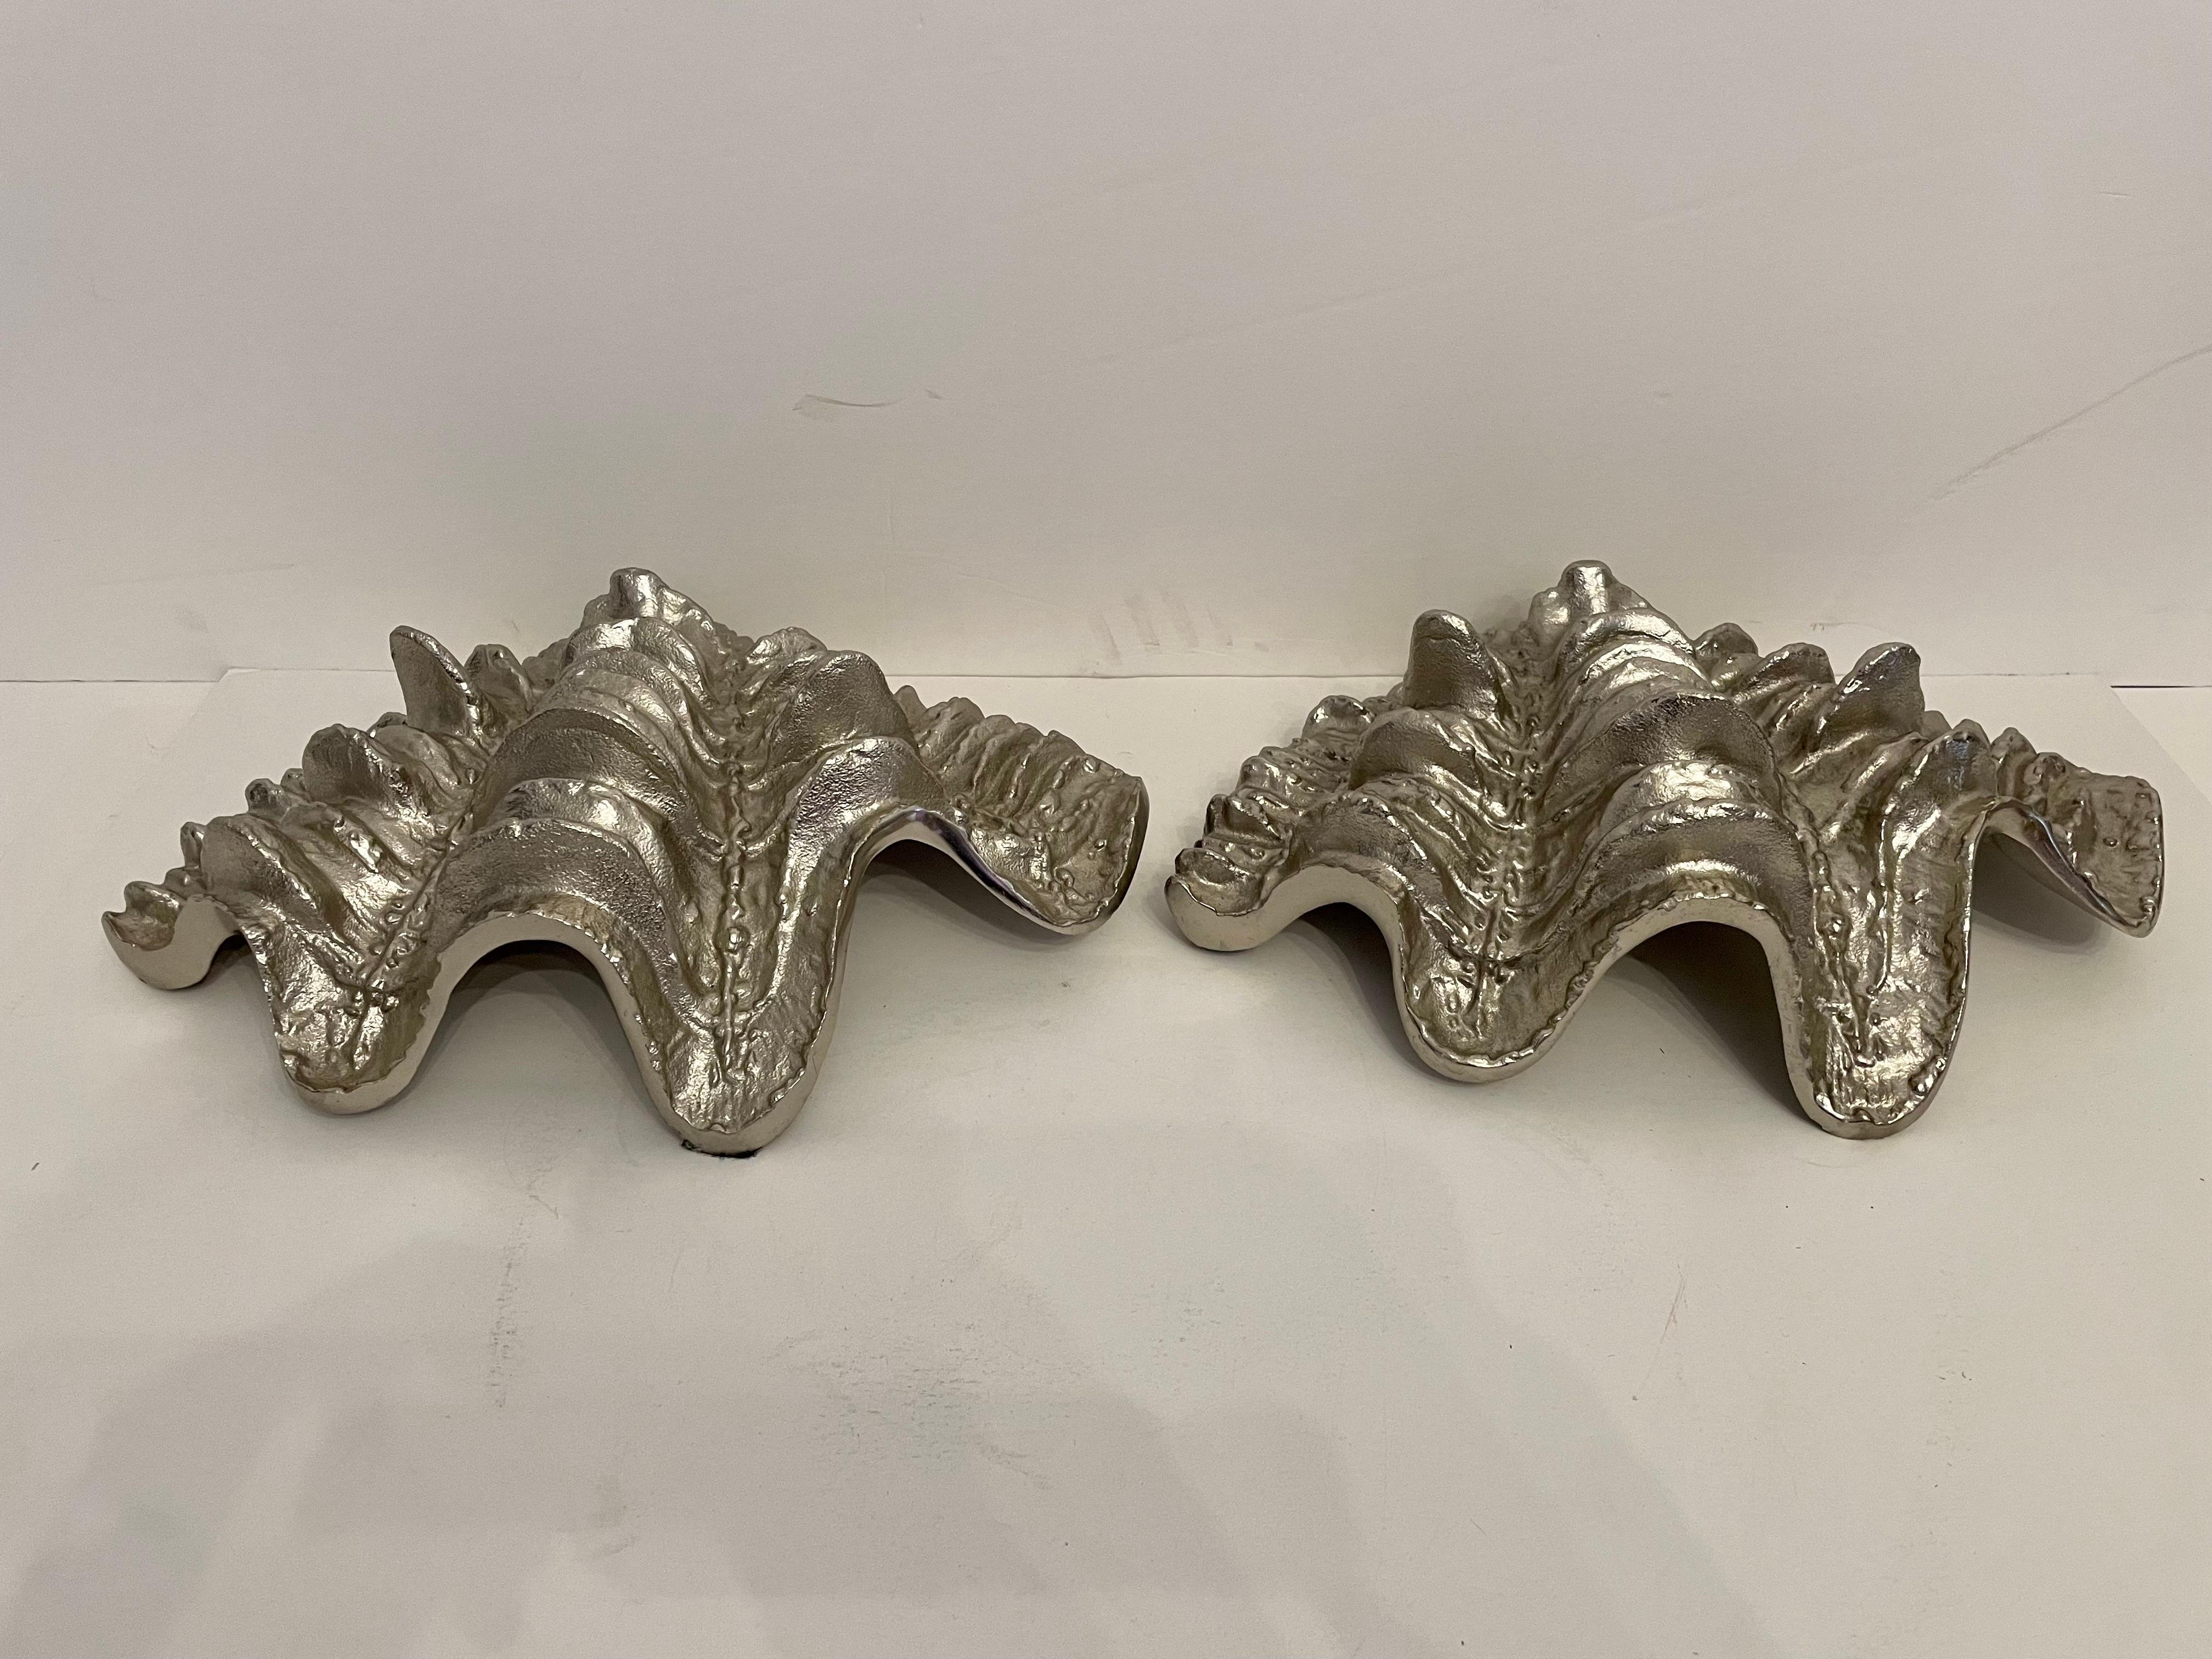  Pair Large Clam Shells or Seashells. Vintage Hollywood Regency style, nicely detailed casting in polished aluminum. Good overall condition with slight patina from age and use. Measures 13